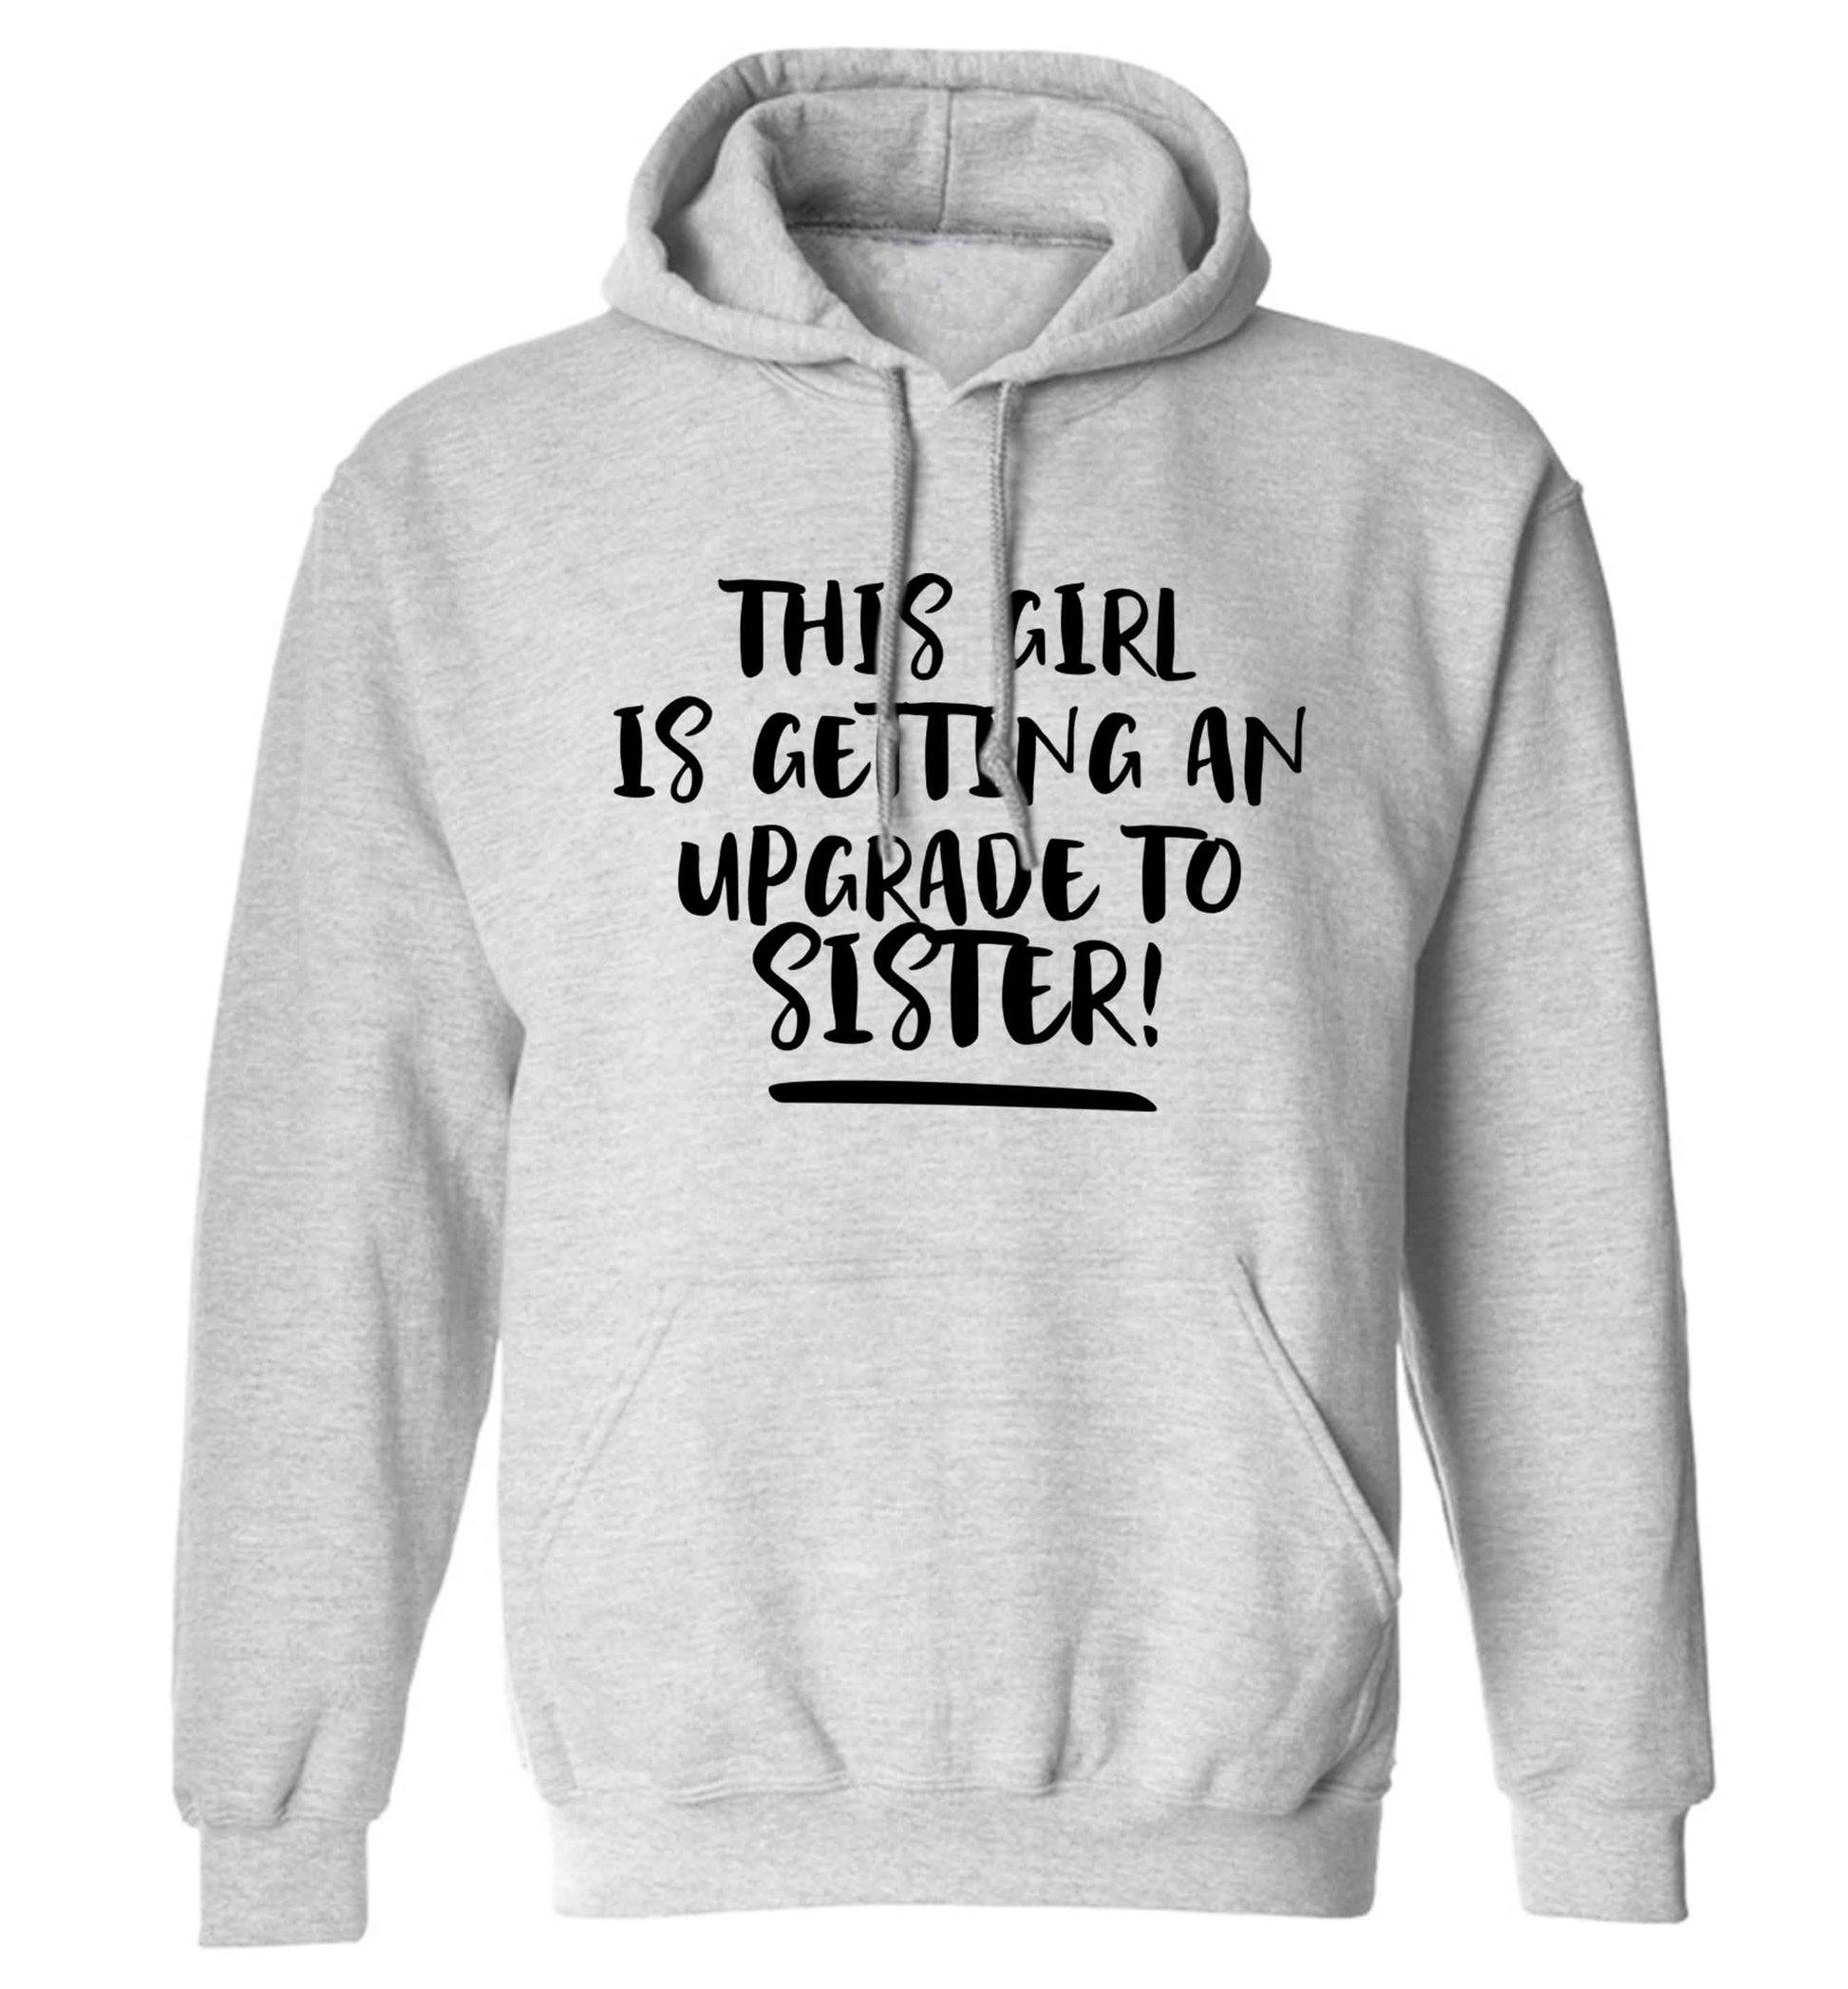 This girl is getting an upgrade to sister! adults unisex grey hoodie 2XL